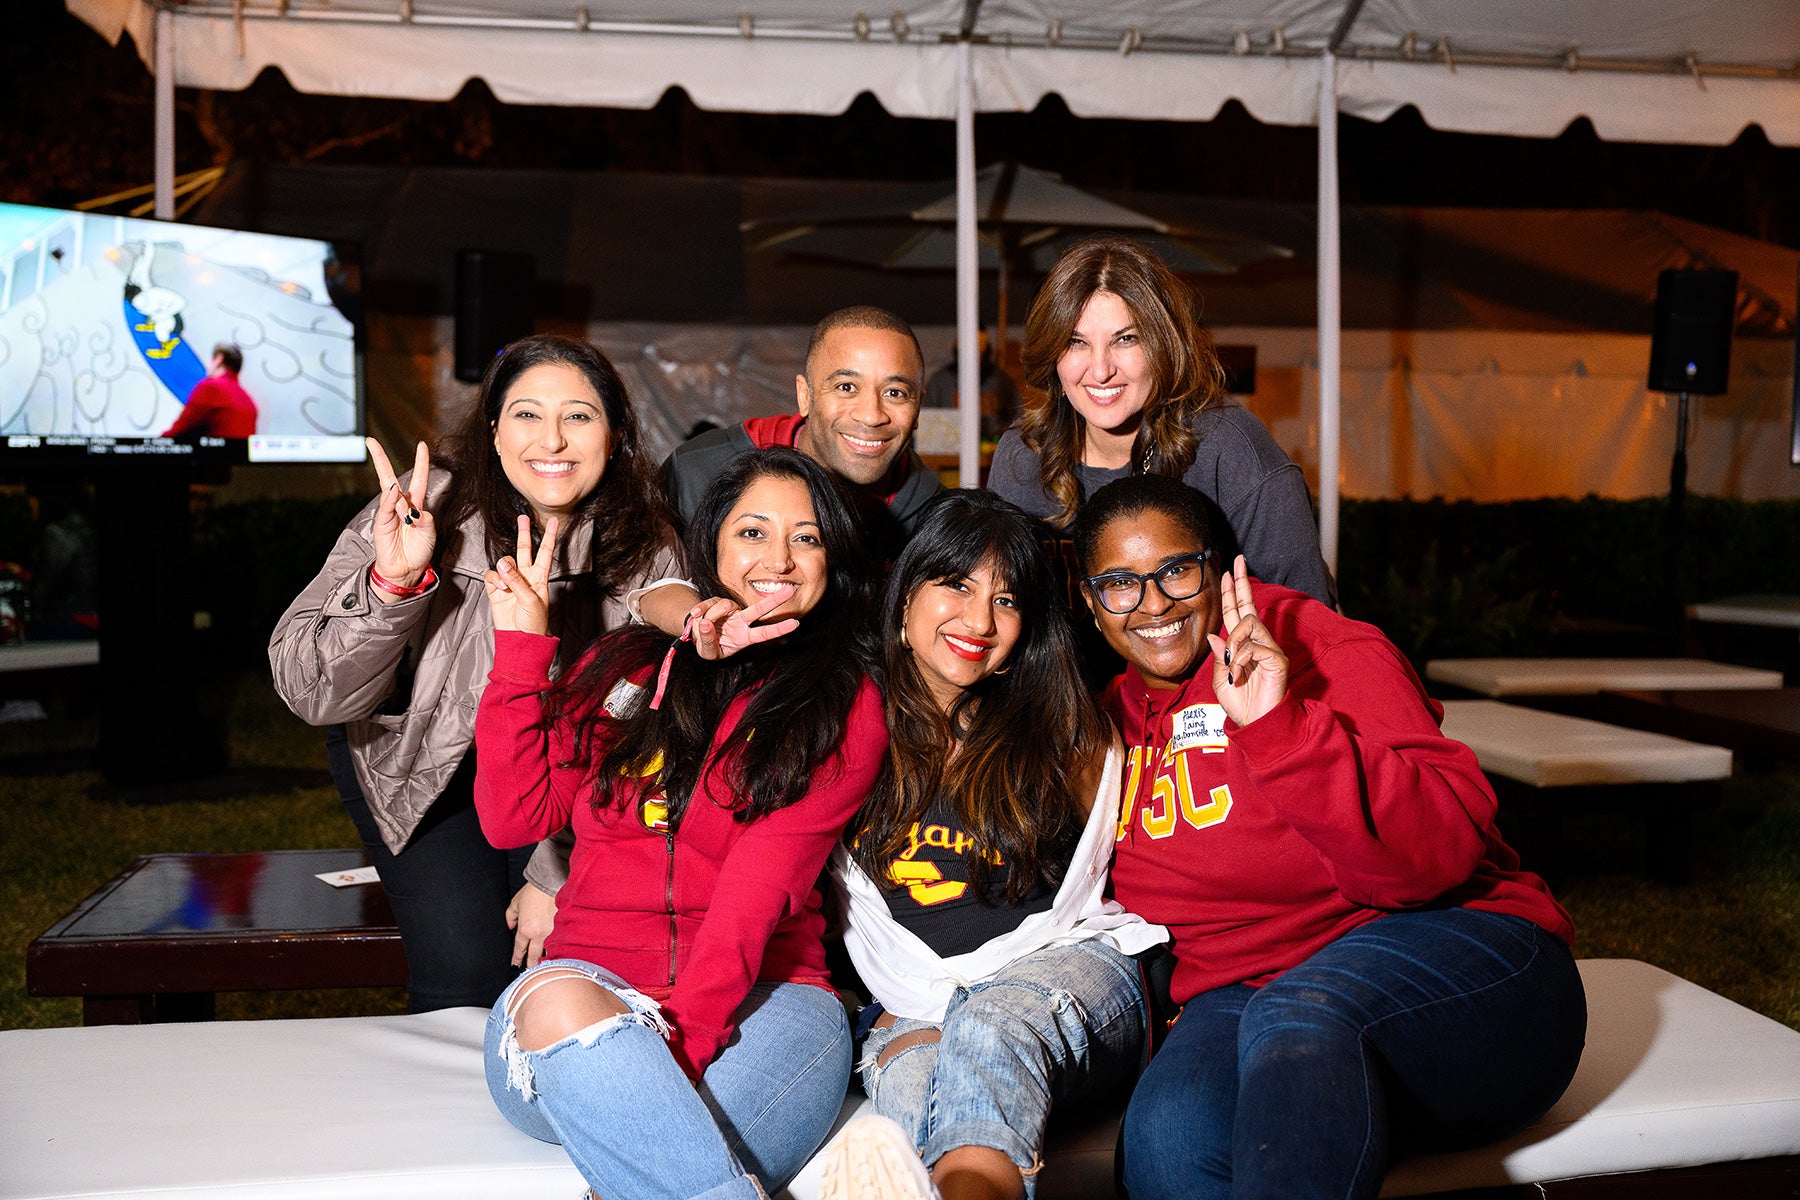 Prisma Health on X: Prisma Health was proud to be the presenting sponsor  of the USC football game against Kentucky on November 18! The recognition  included a game ball presentation and announcement